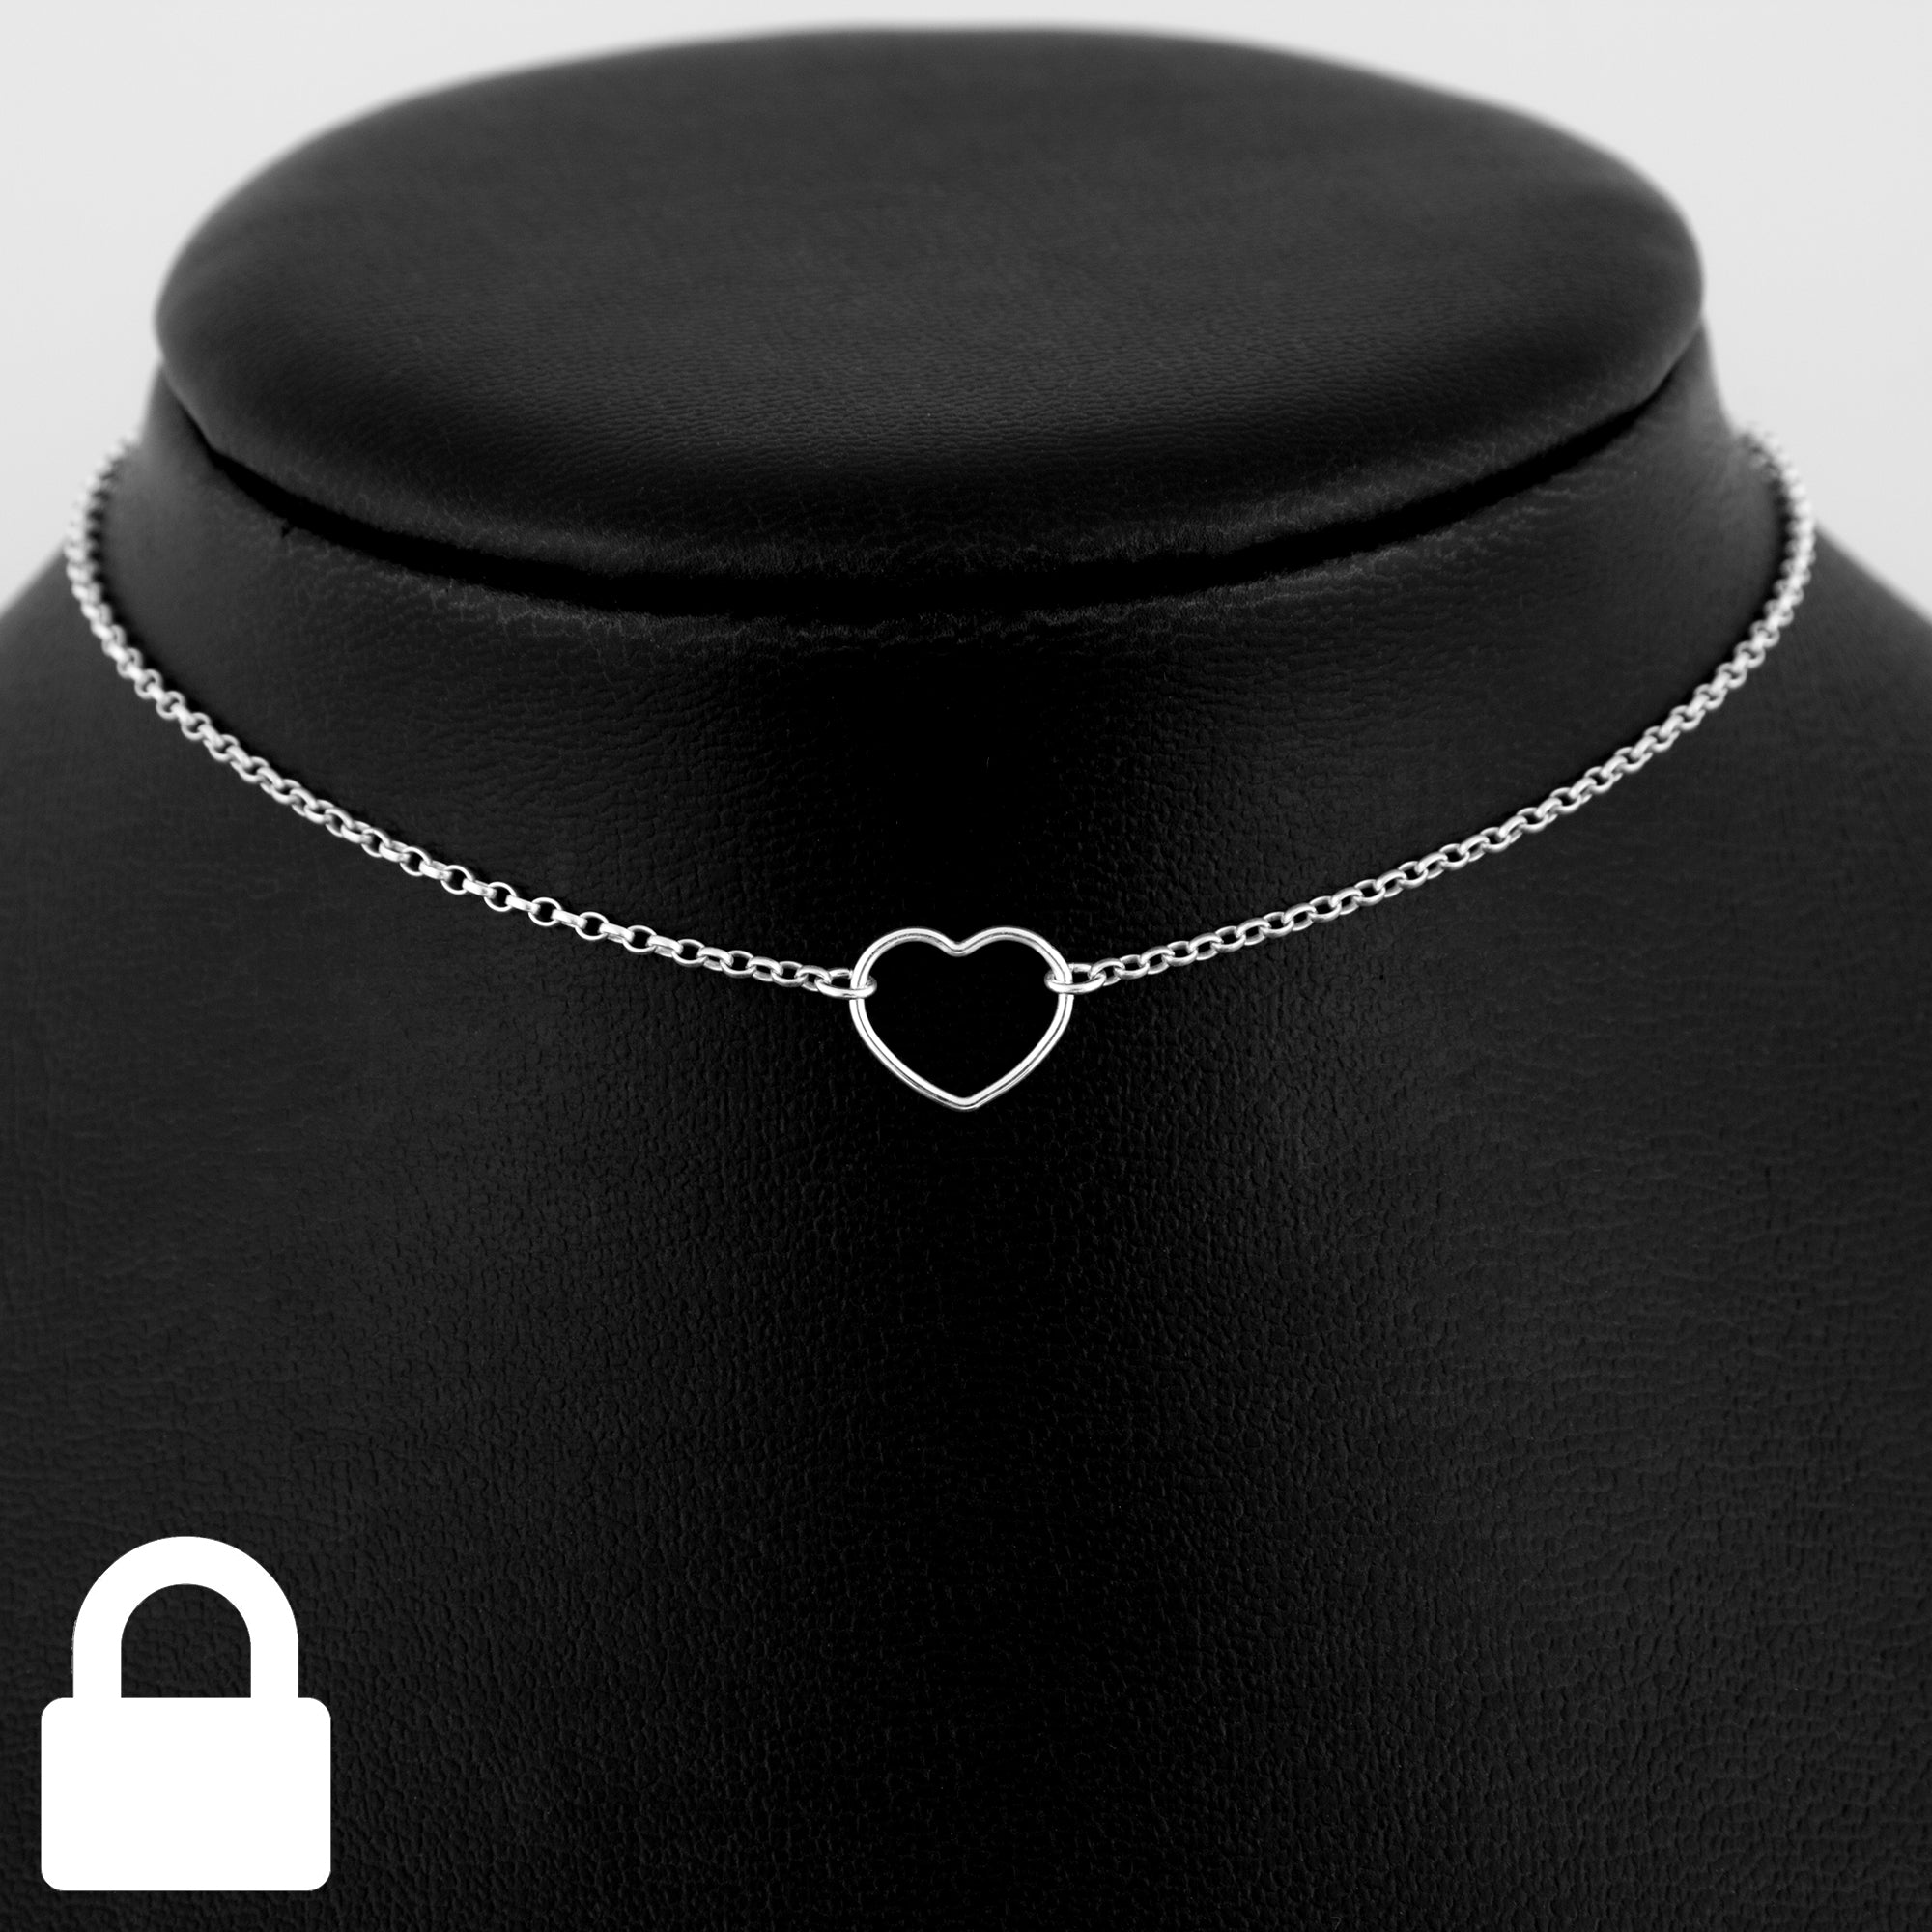 Locking Necklace Submissive Choker Day Collar Nickel Heart Lock - Etsy